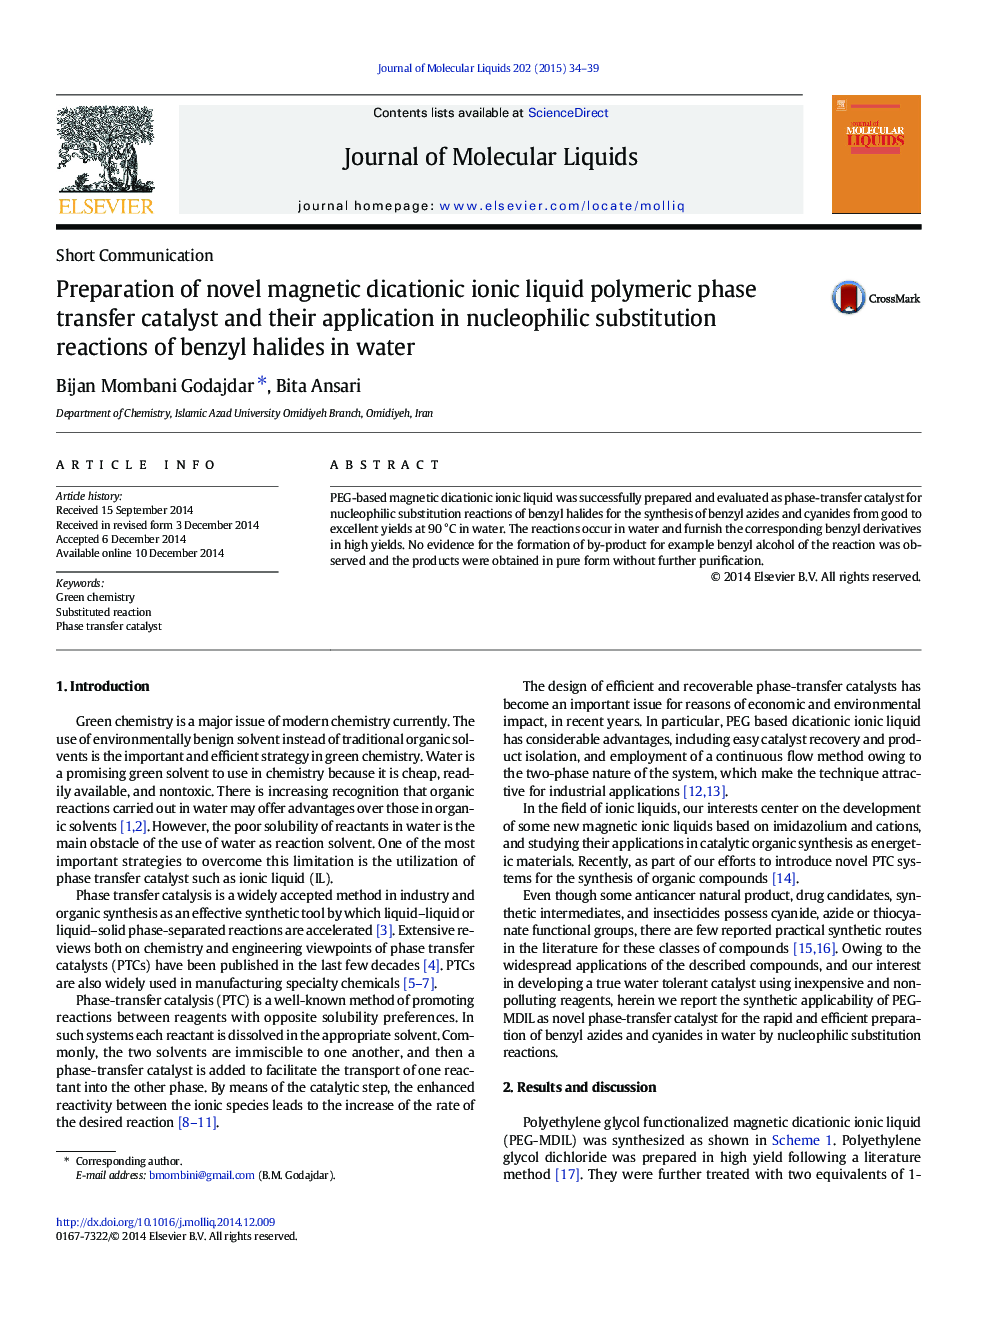 Preparation of novel magnetic dicationic ionic liquid polymeric phase transfer catalyst and their application in nucleophilic substitution reactions of benzyl halides in water